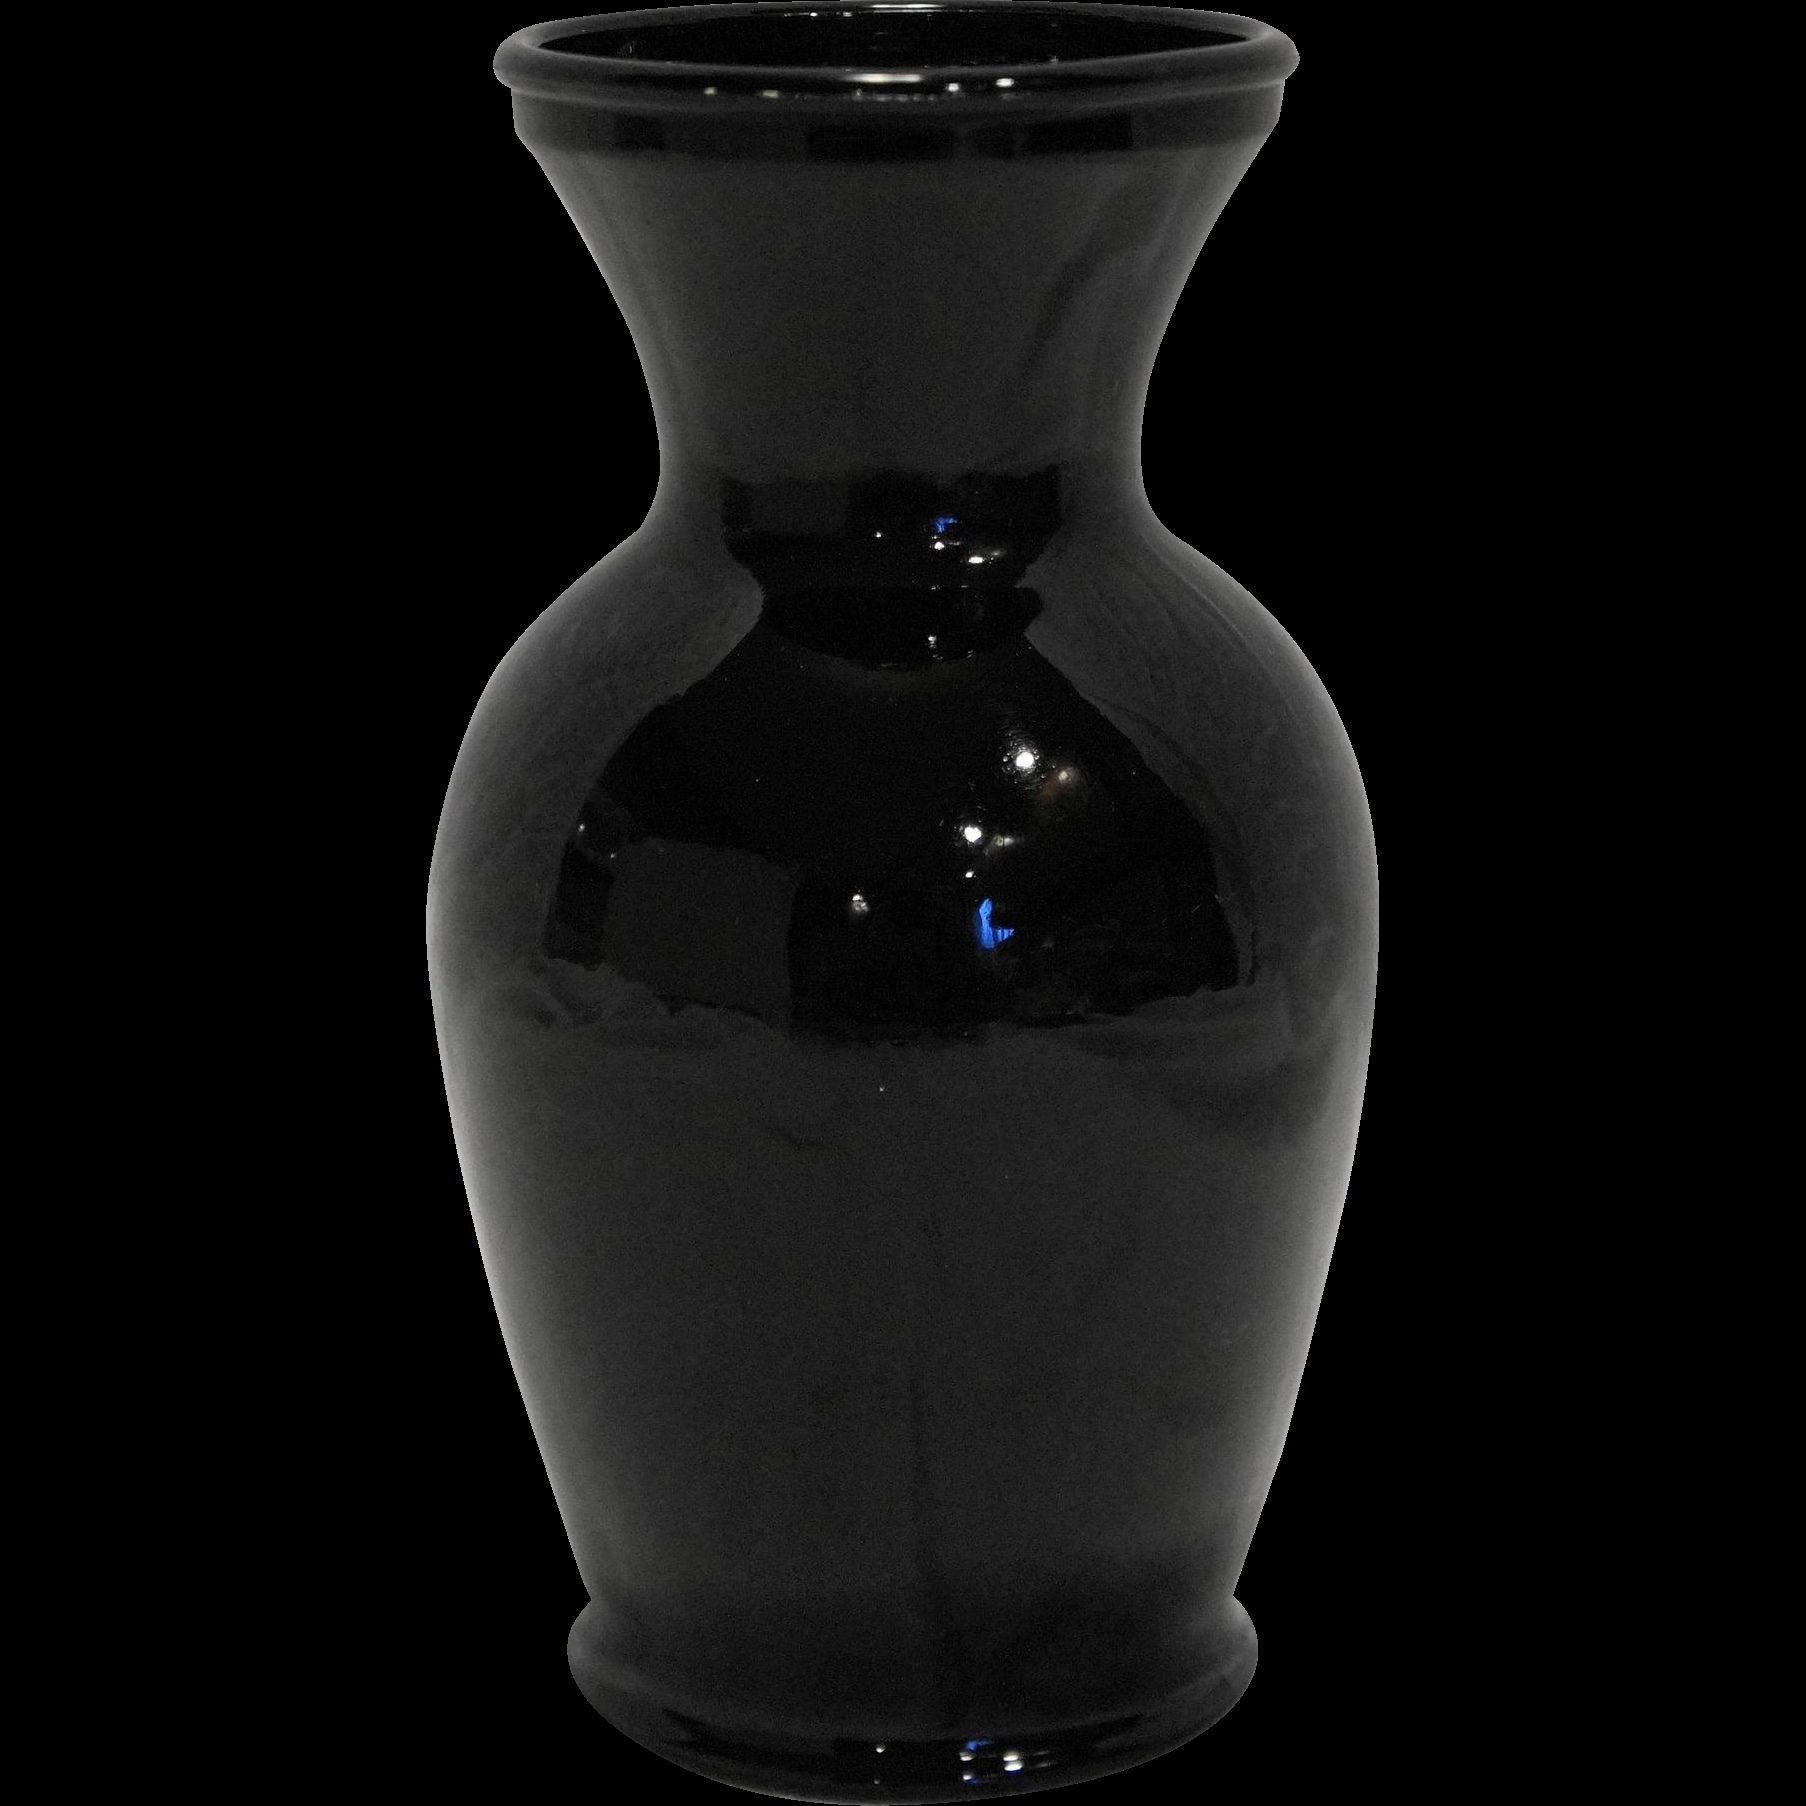 20 Best Ceramic Vase Fountain 2024 free download ceramic vase fountain of white ceramic vase unique black interior paint awesome pot1h vases in white ceramic vase unique black interior paint awesome pot1h vases simple vase munity support